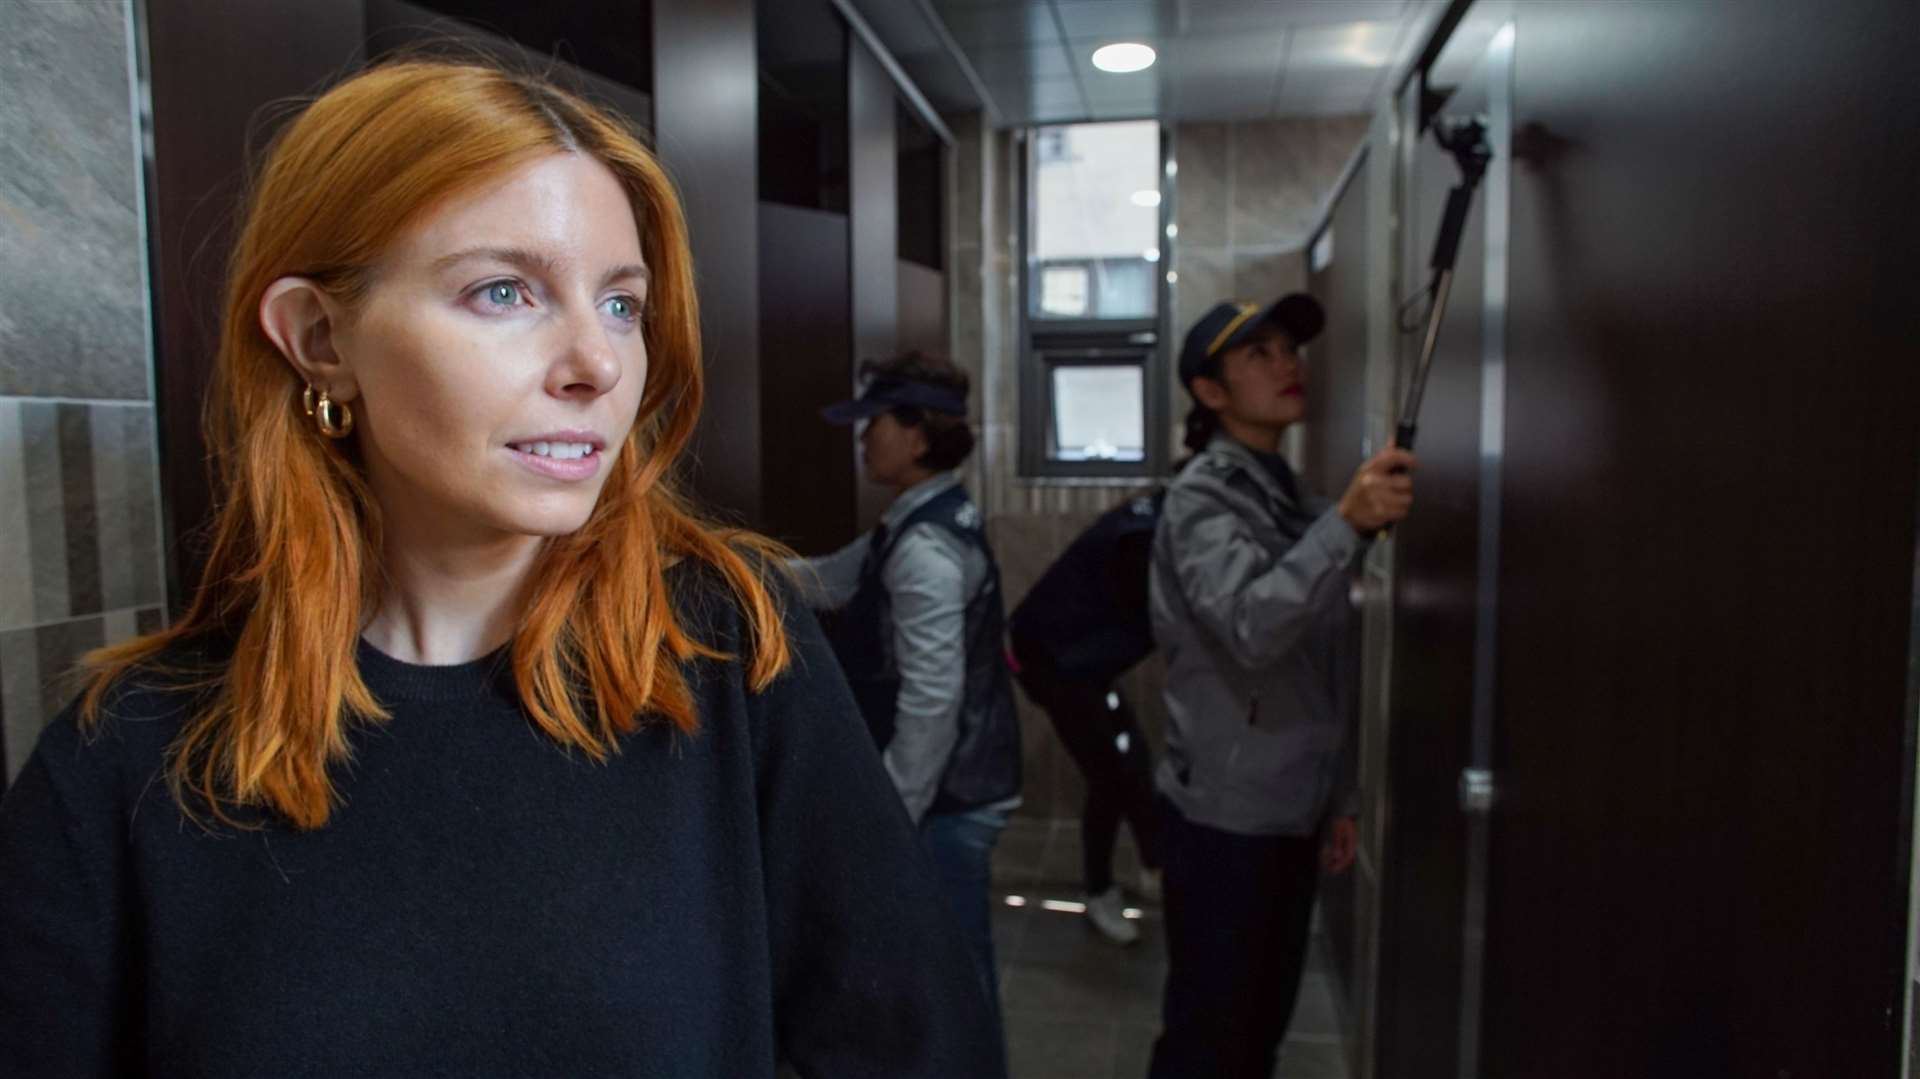 Stacey Dooley joins Seoul’s Safety Sheriffs as they scan public toilets for spycams Picture: Milk & Honey Productions Ltd - Photographer: S. Buonajuti